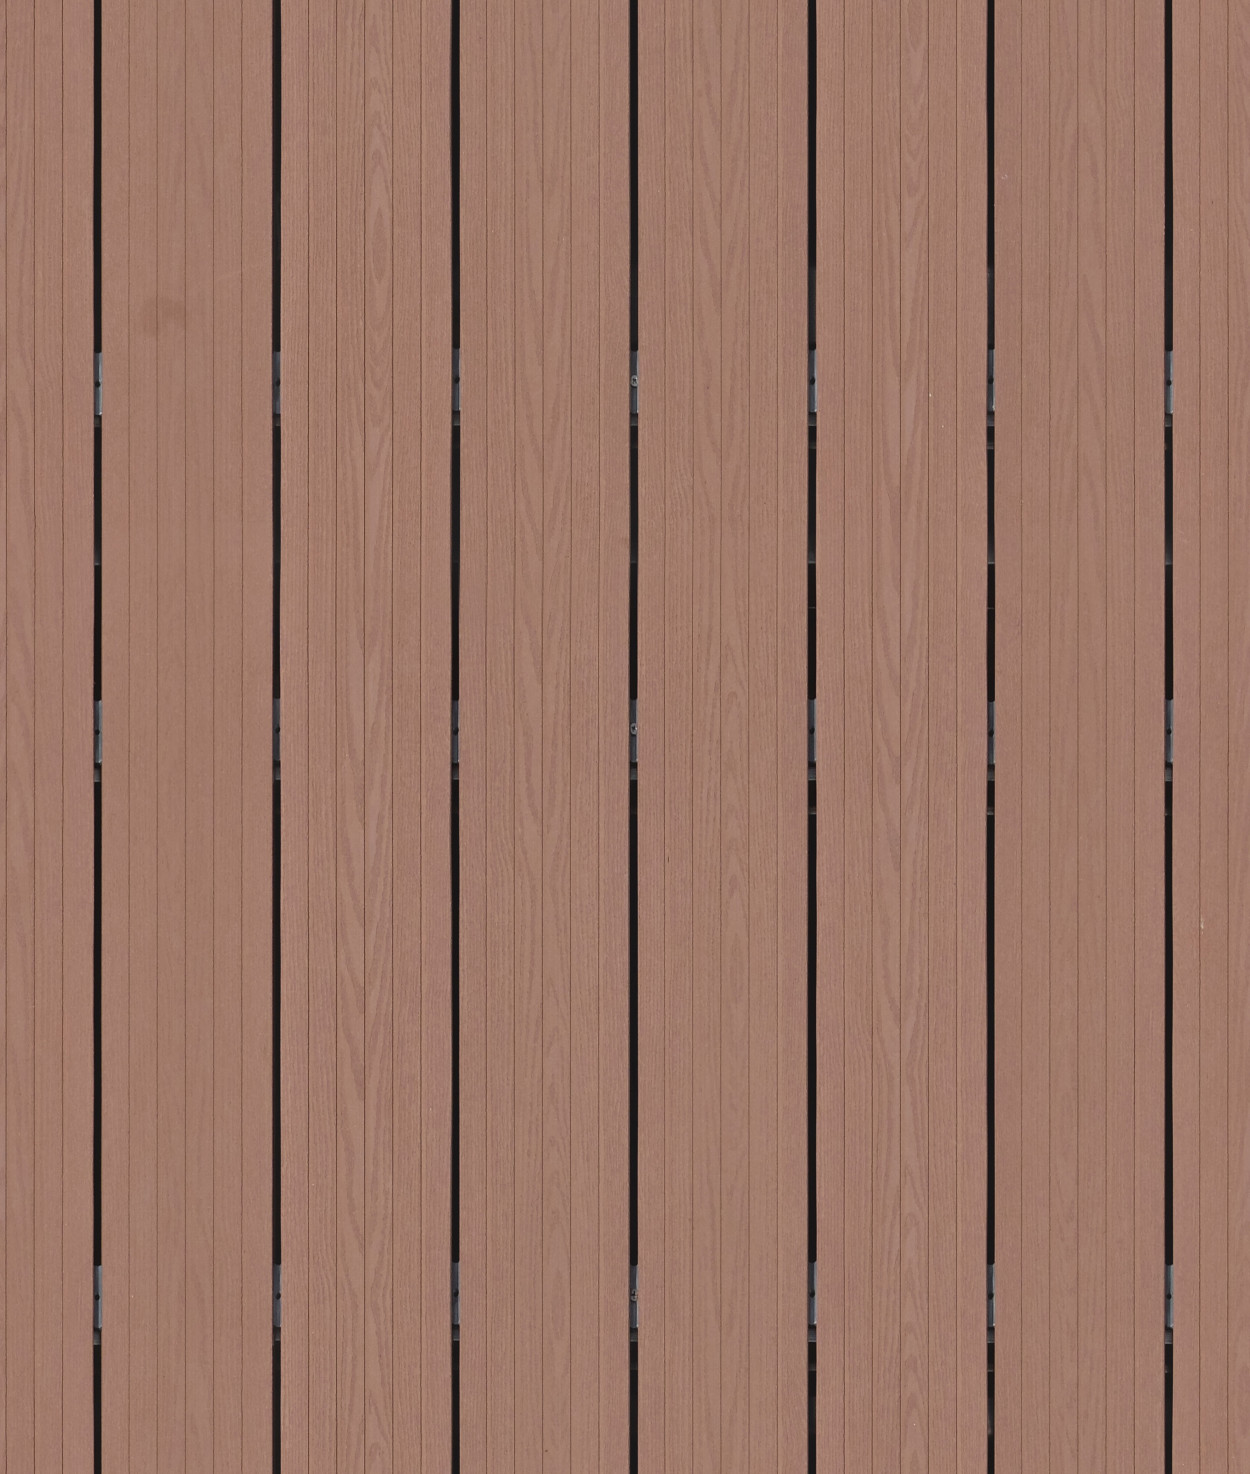 A seamless wood decking boards texture for use in architectural drawings and 3D models